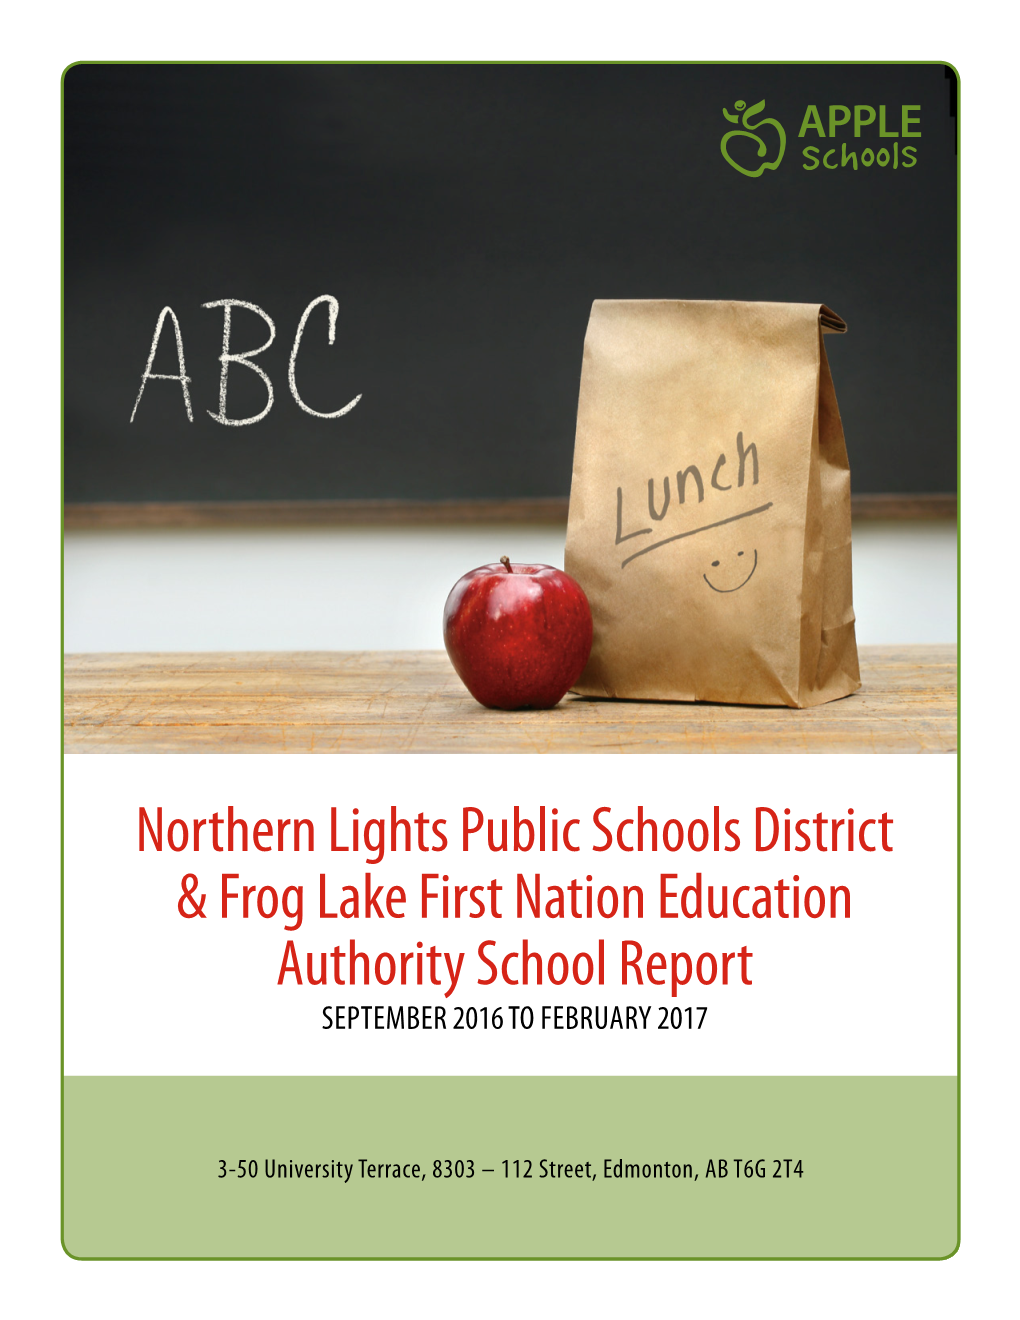 Northern Lights Public Schools District & Frog Lake First Nation Education